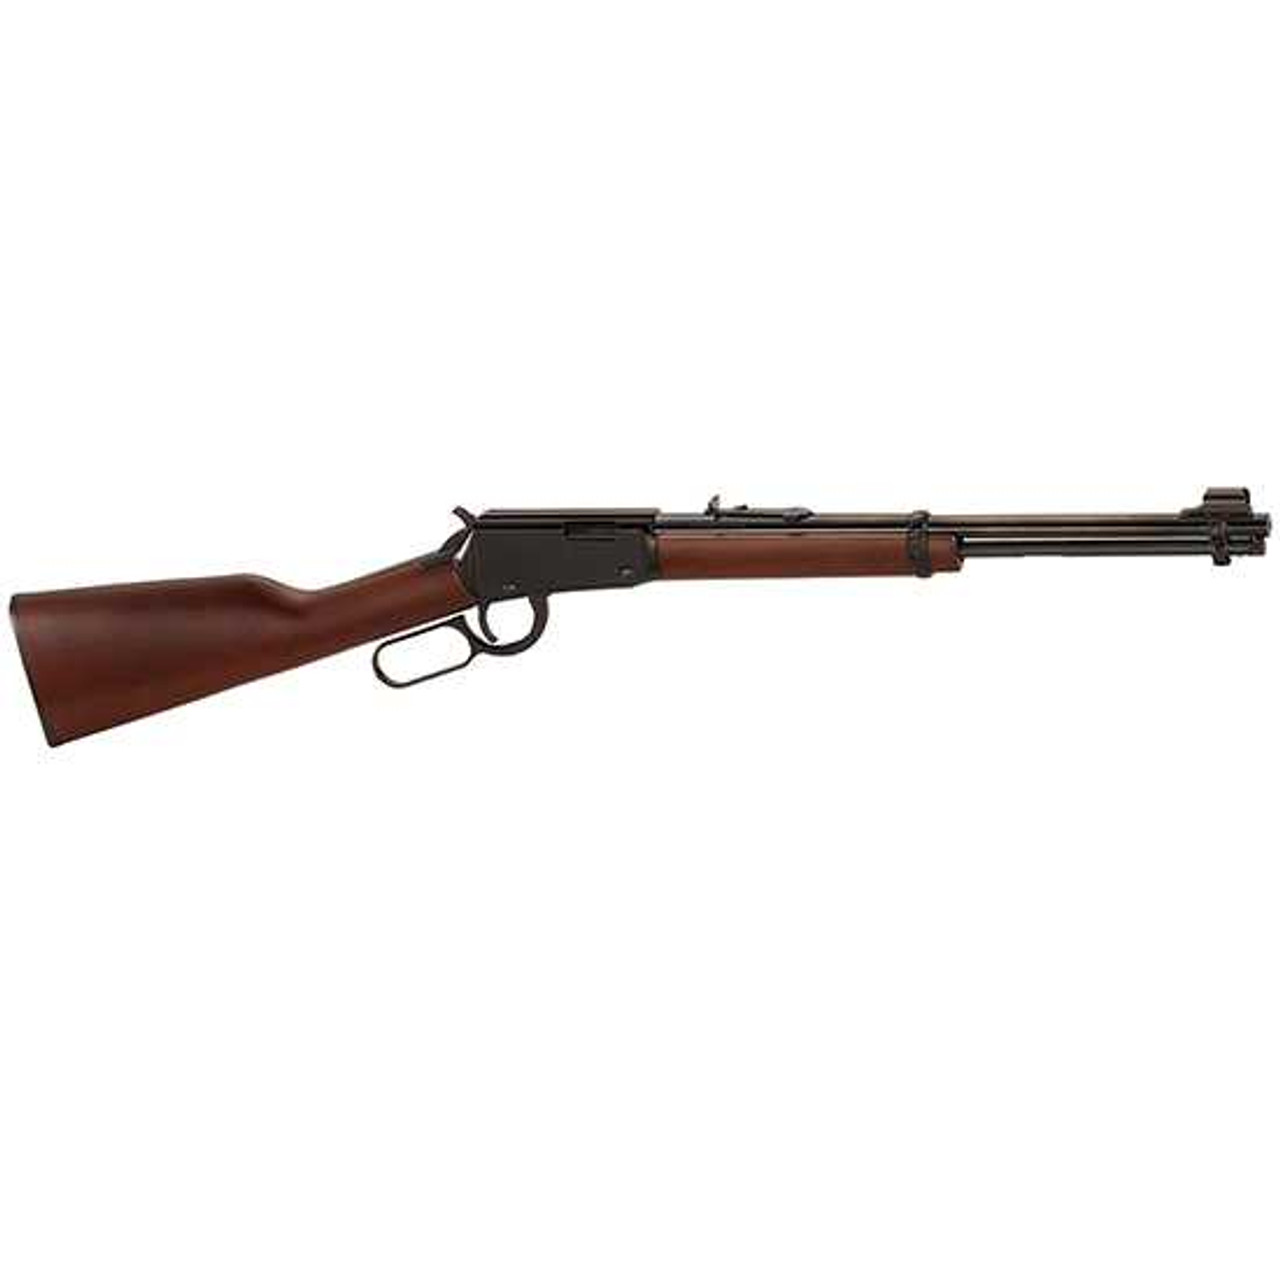 HENRY YOUTH 22LR 16 LEVER ACTION